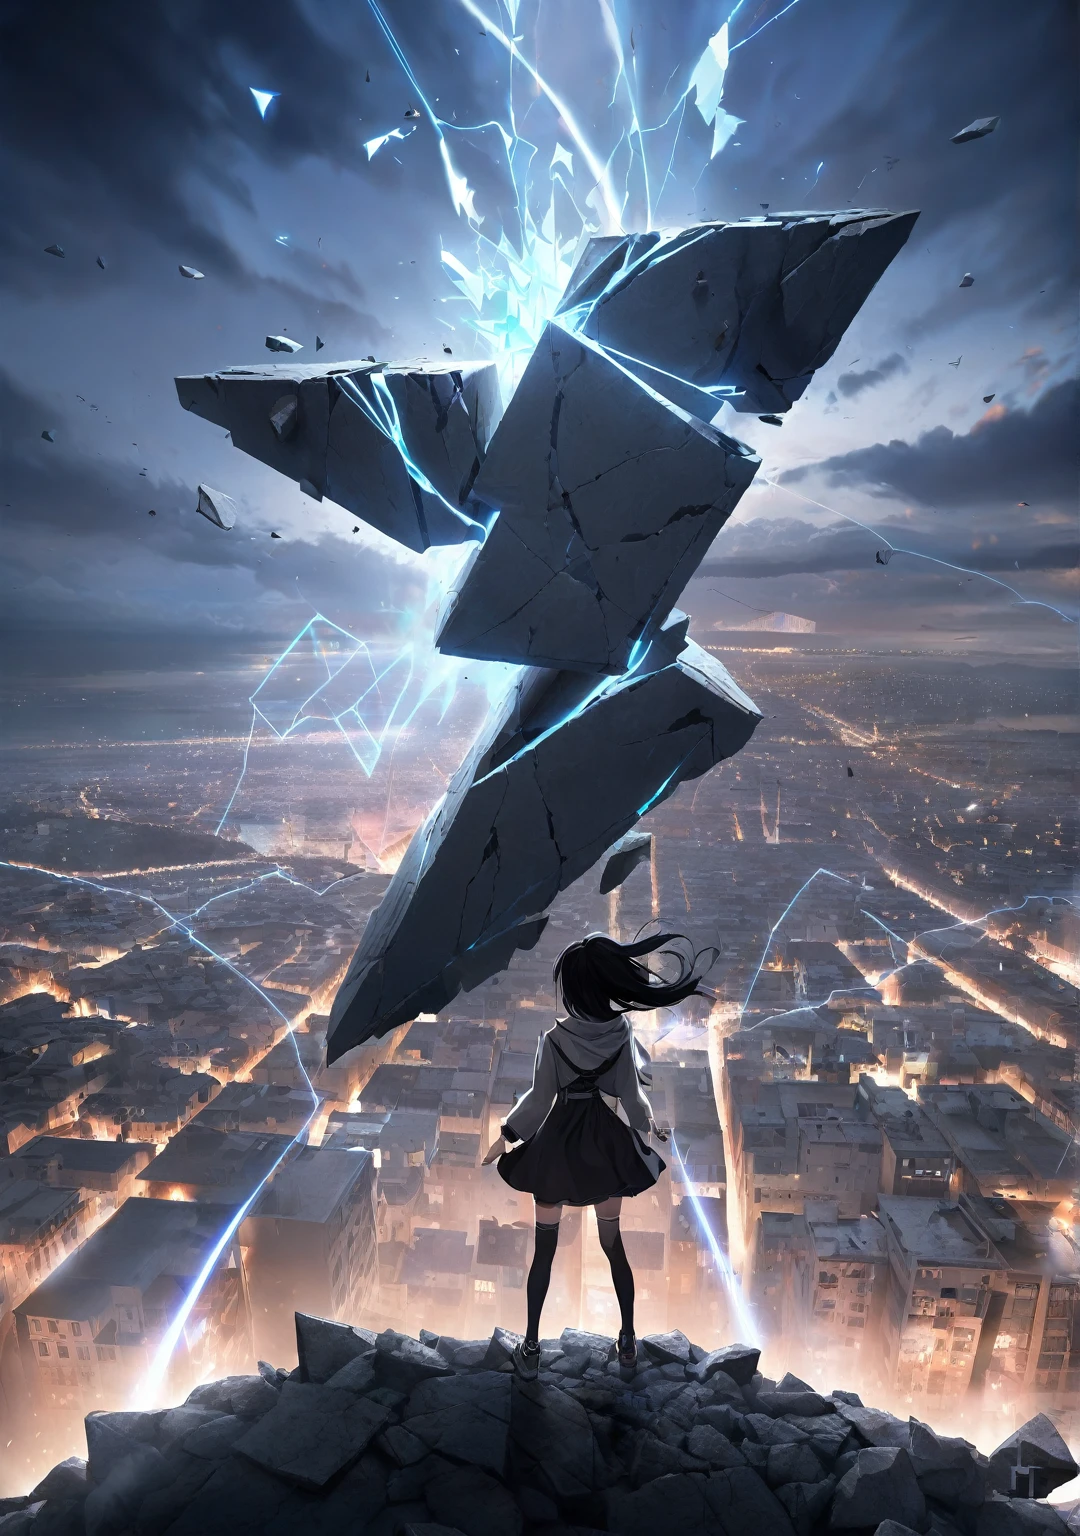 Breathtaking graphics, angle from the ground, shooting epic shots: a huge magic rune hovering over the city, breathtaking landscapes and impressive lighting effects that create impressive visual impressions, the destruction of the city, ((view from the ground: 1.2)), ((a girl with black hair in the foreground:1.2))